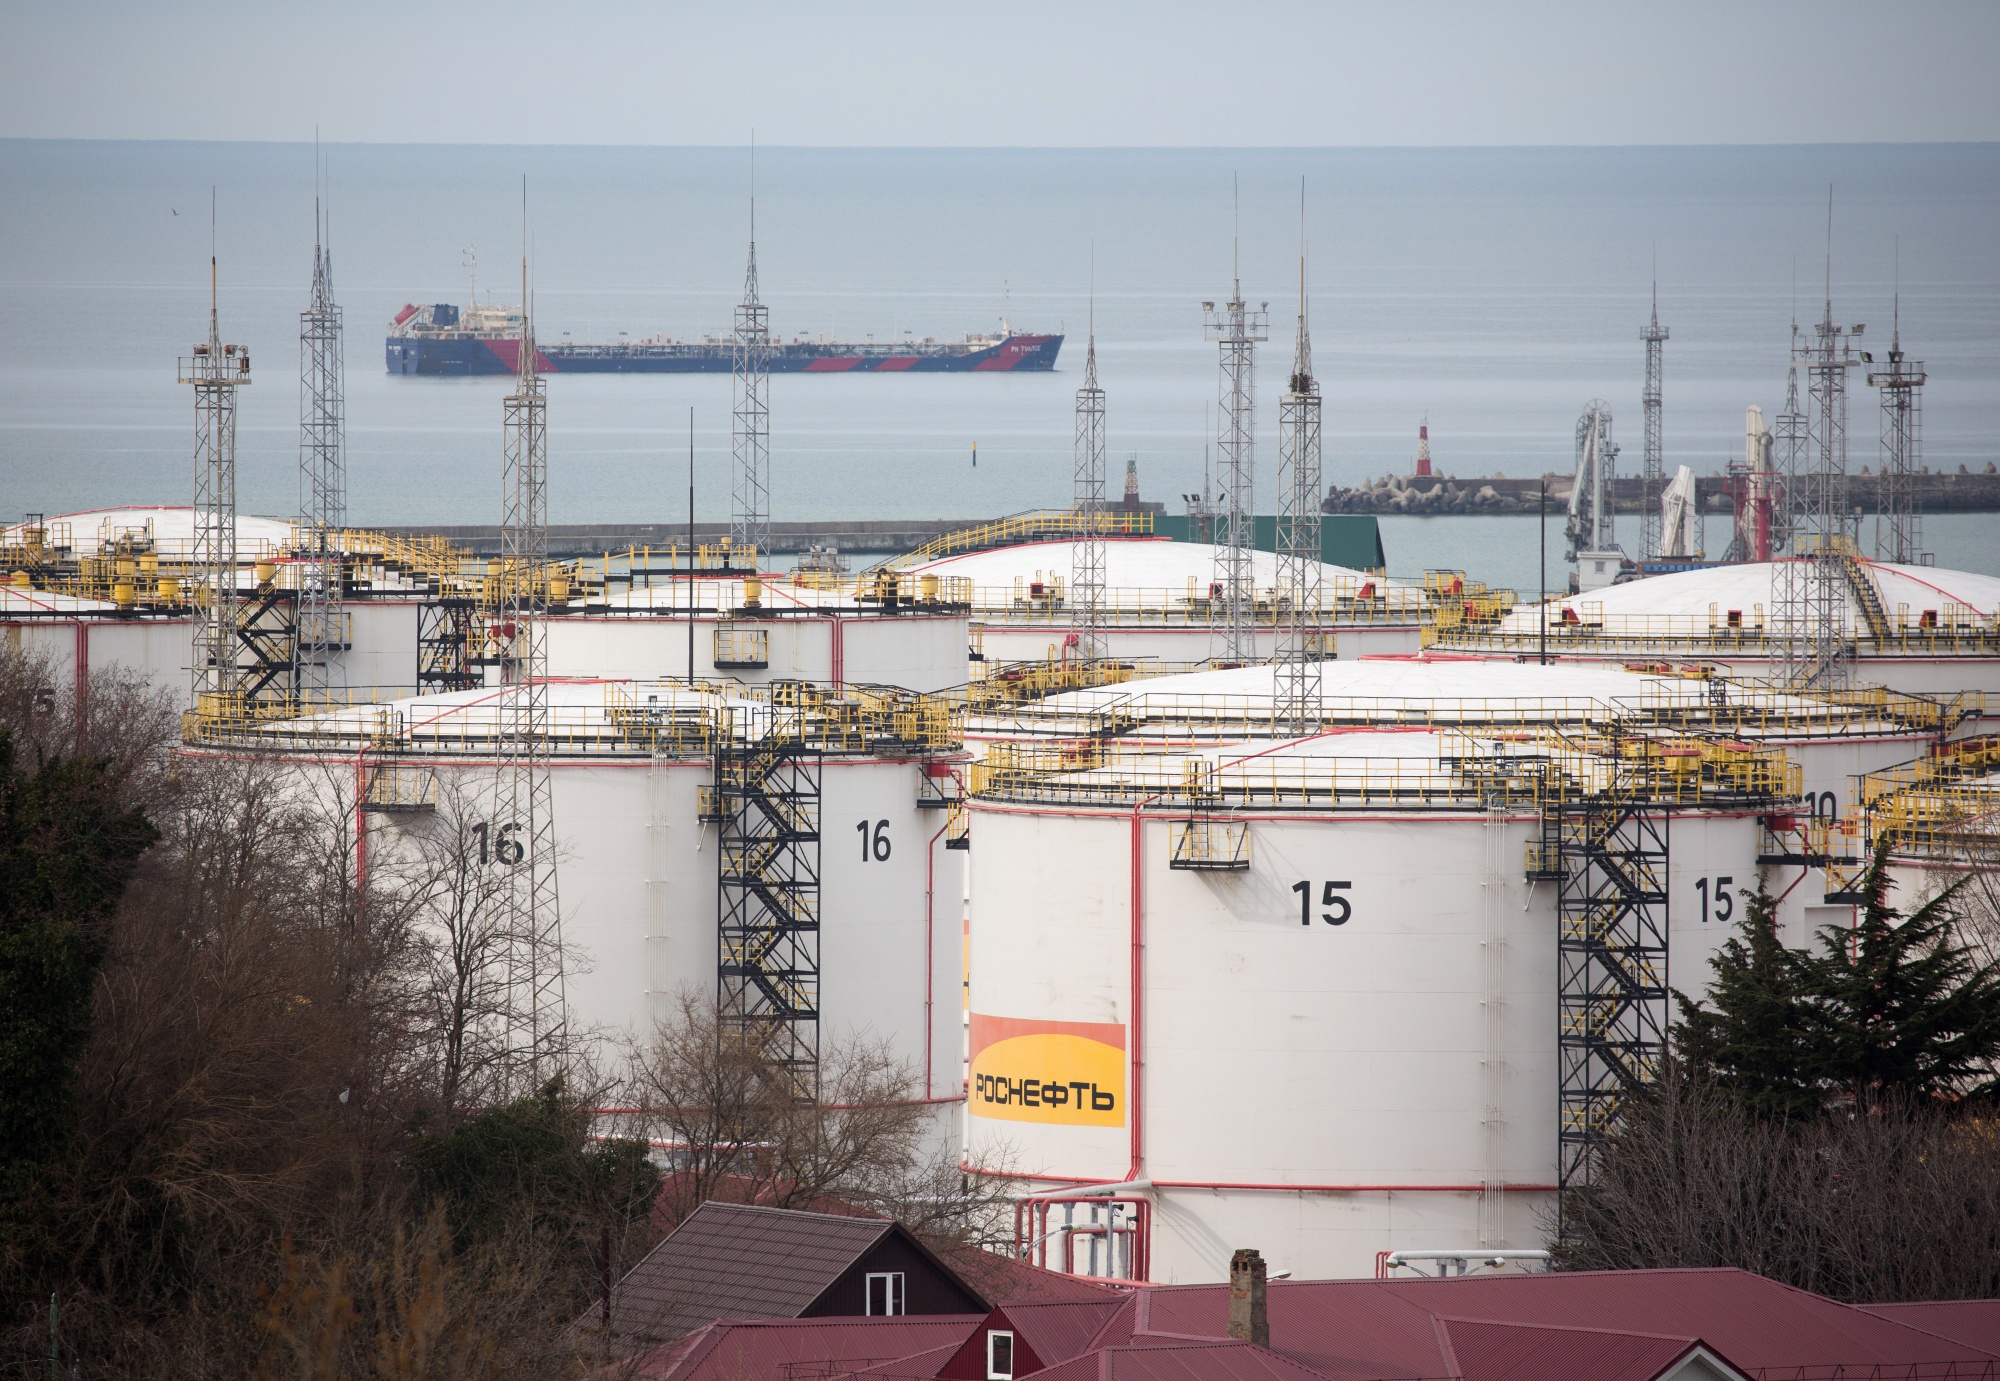 Oil storage tanks stand at the RN-Tuapsinsky refinery in Tuapse, Russia, on March 23.